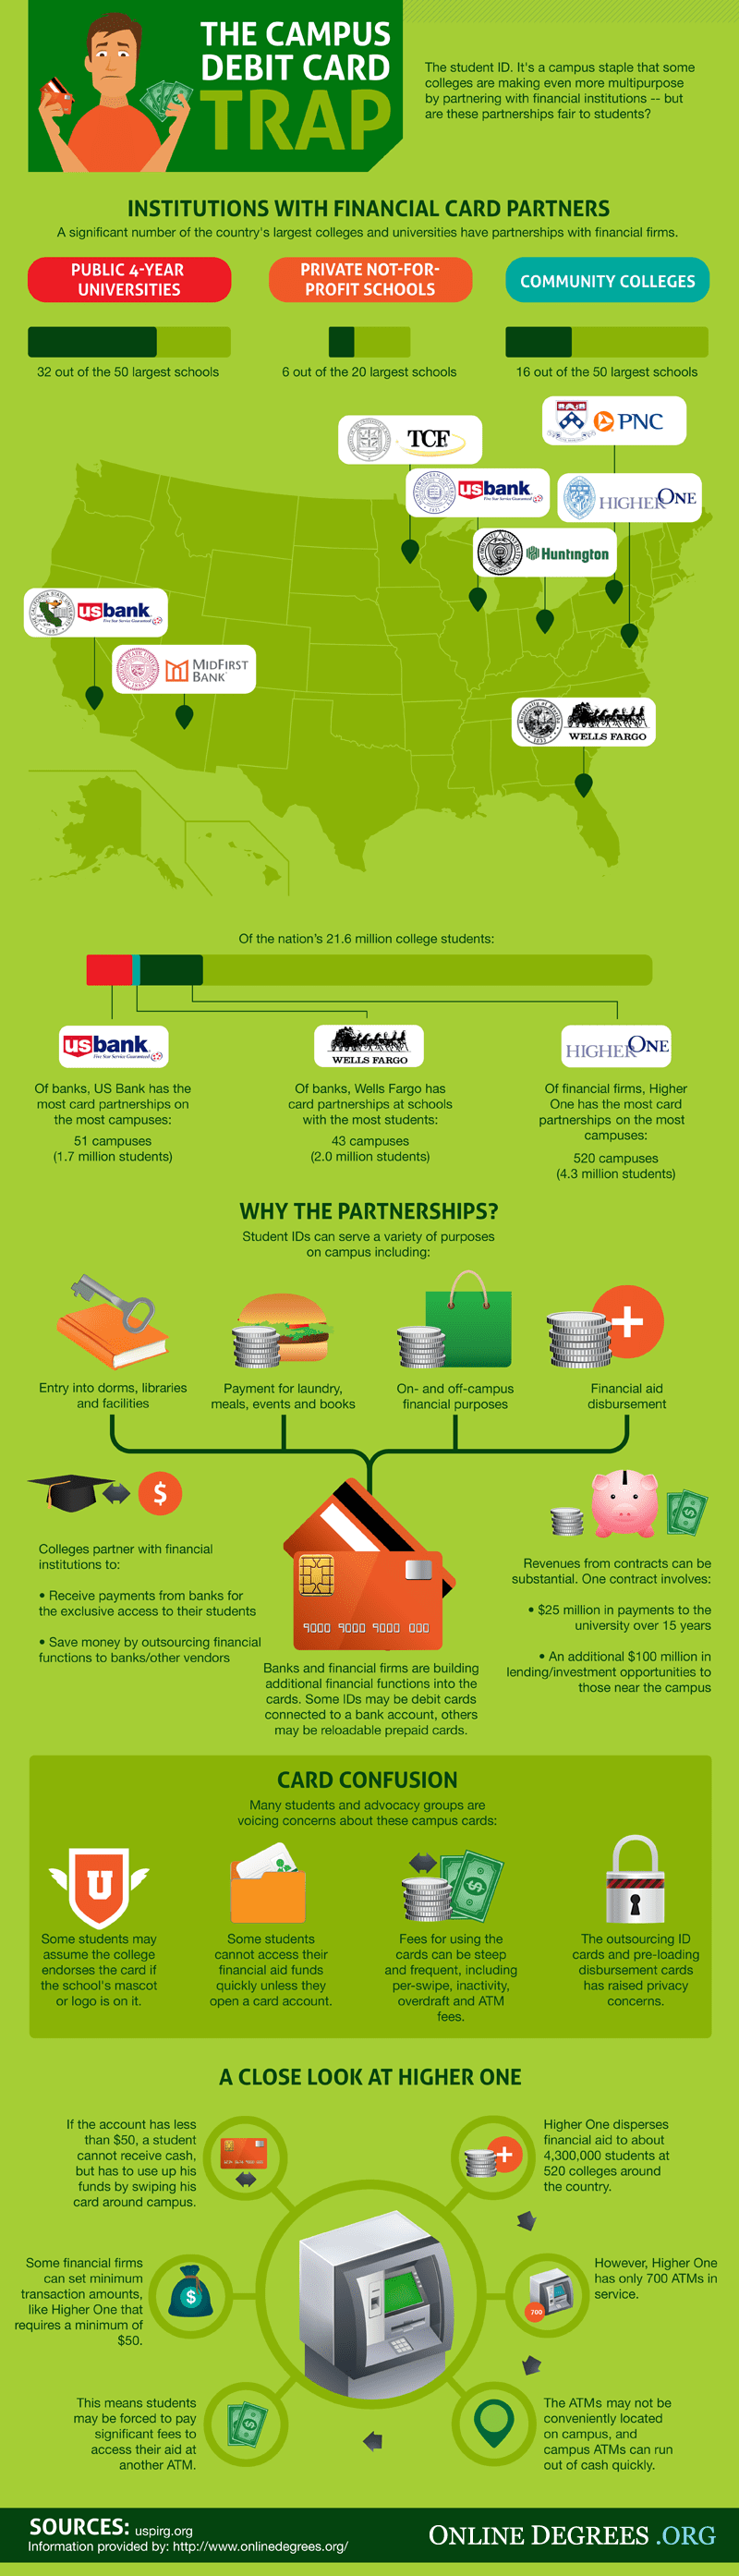 The Campus Debit Card Trap infographic